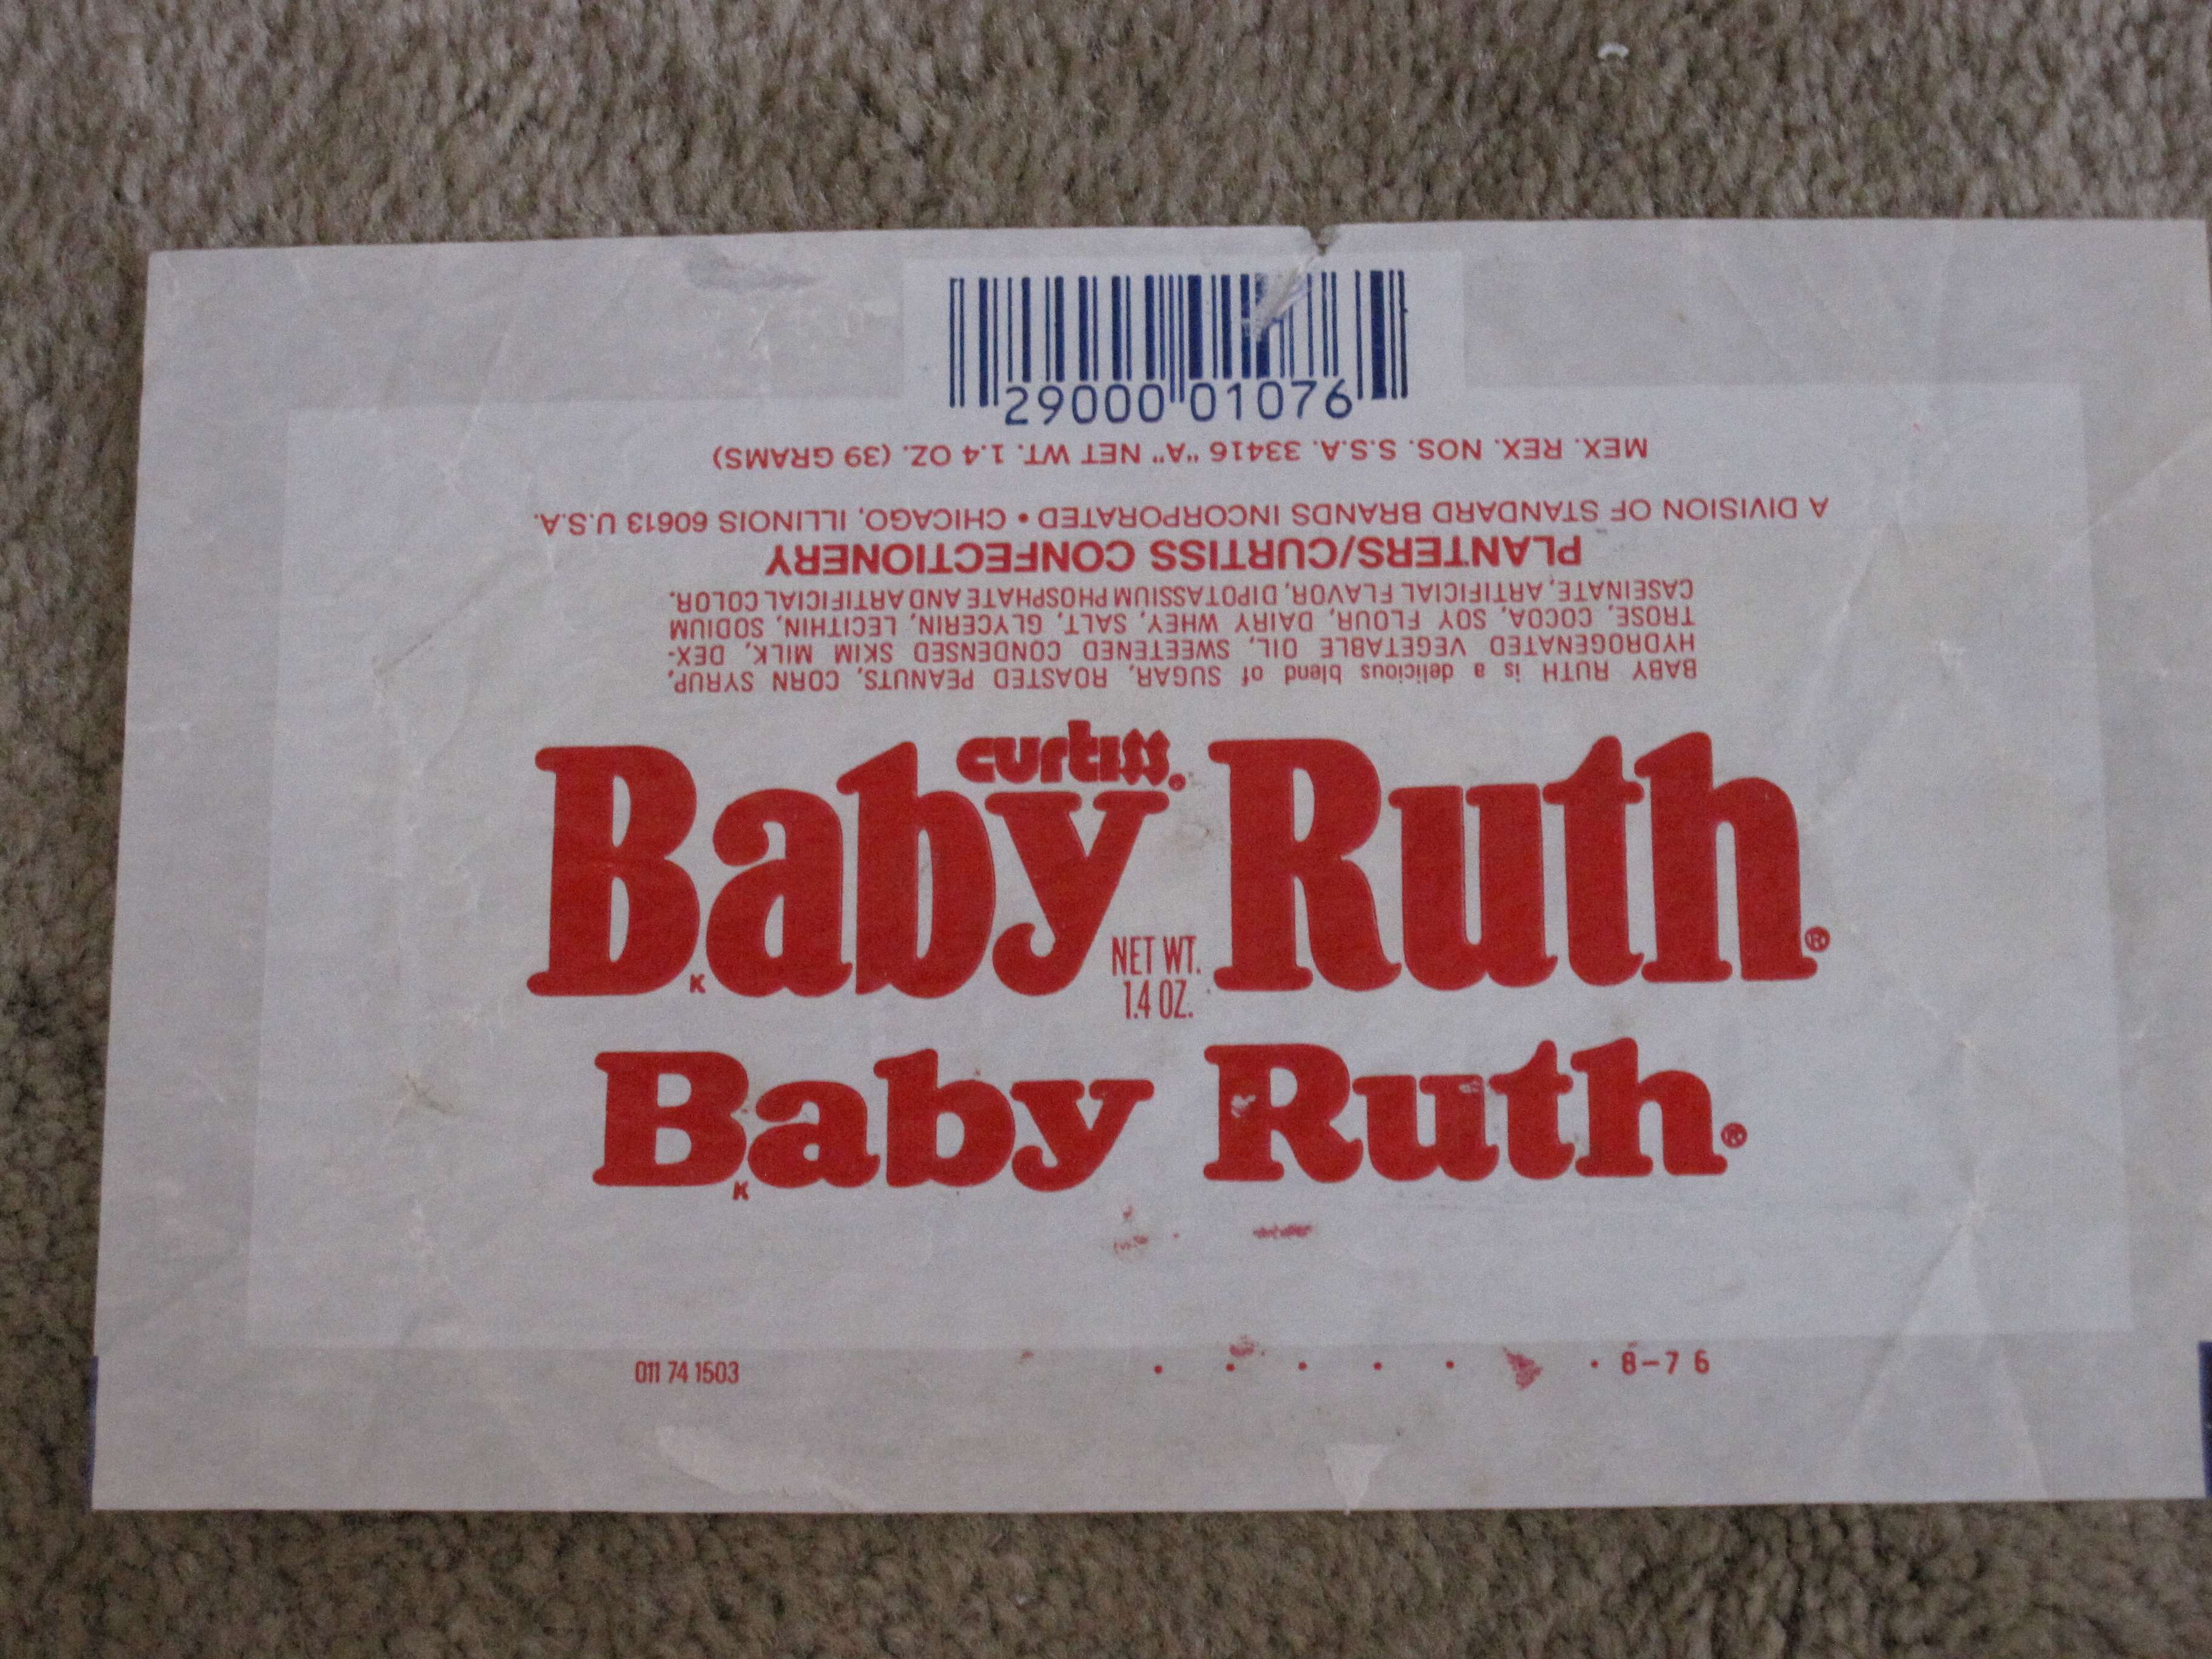 The Goonies Baby Ruth, which version?